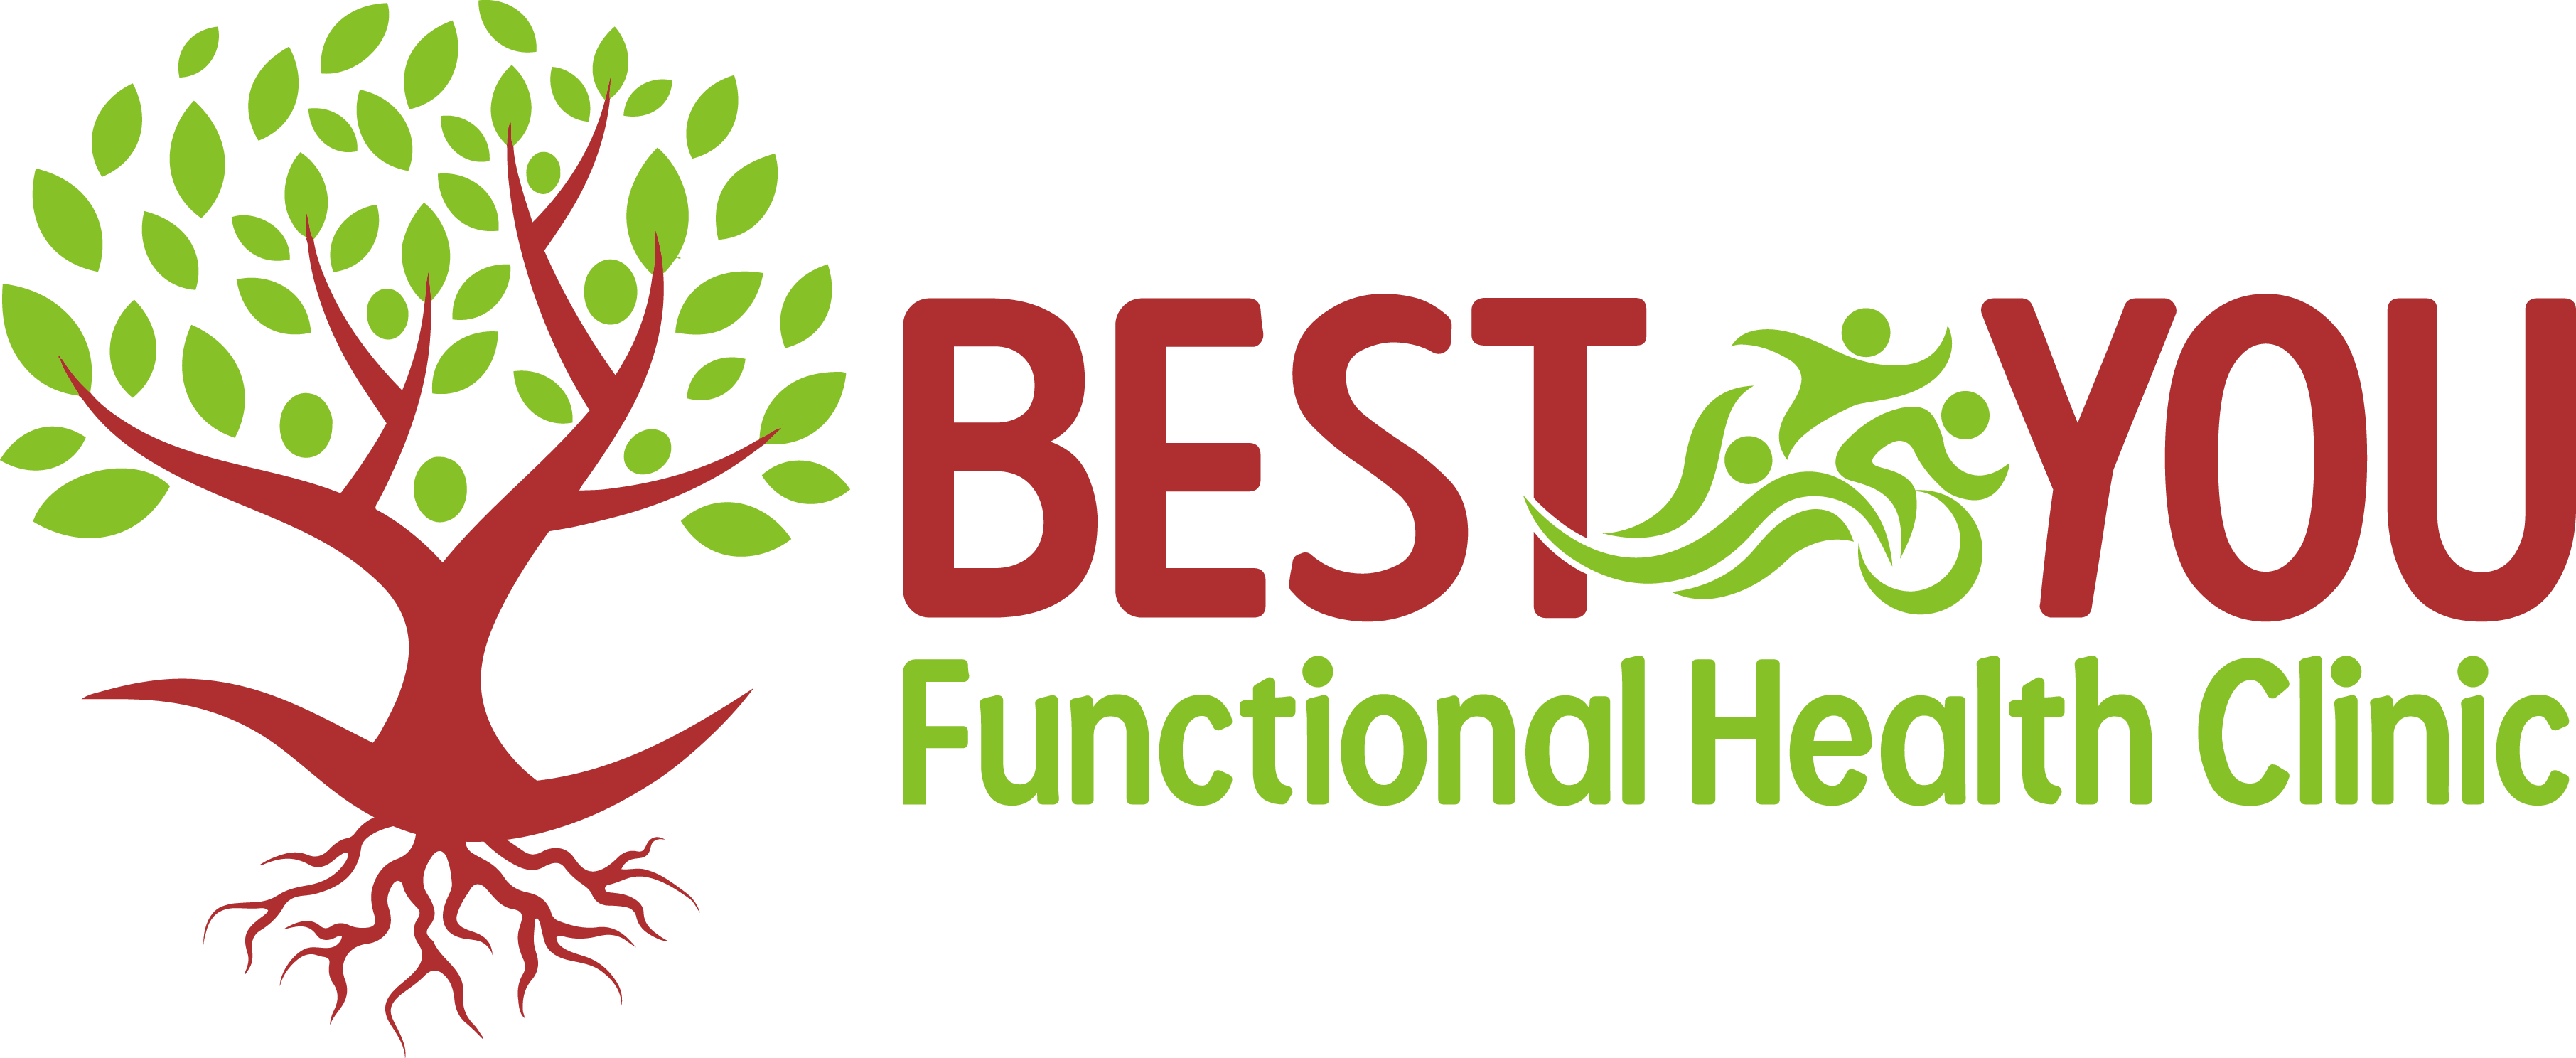 Best You - Functional Health Clinic company logo